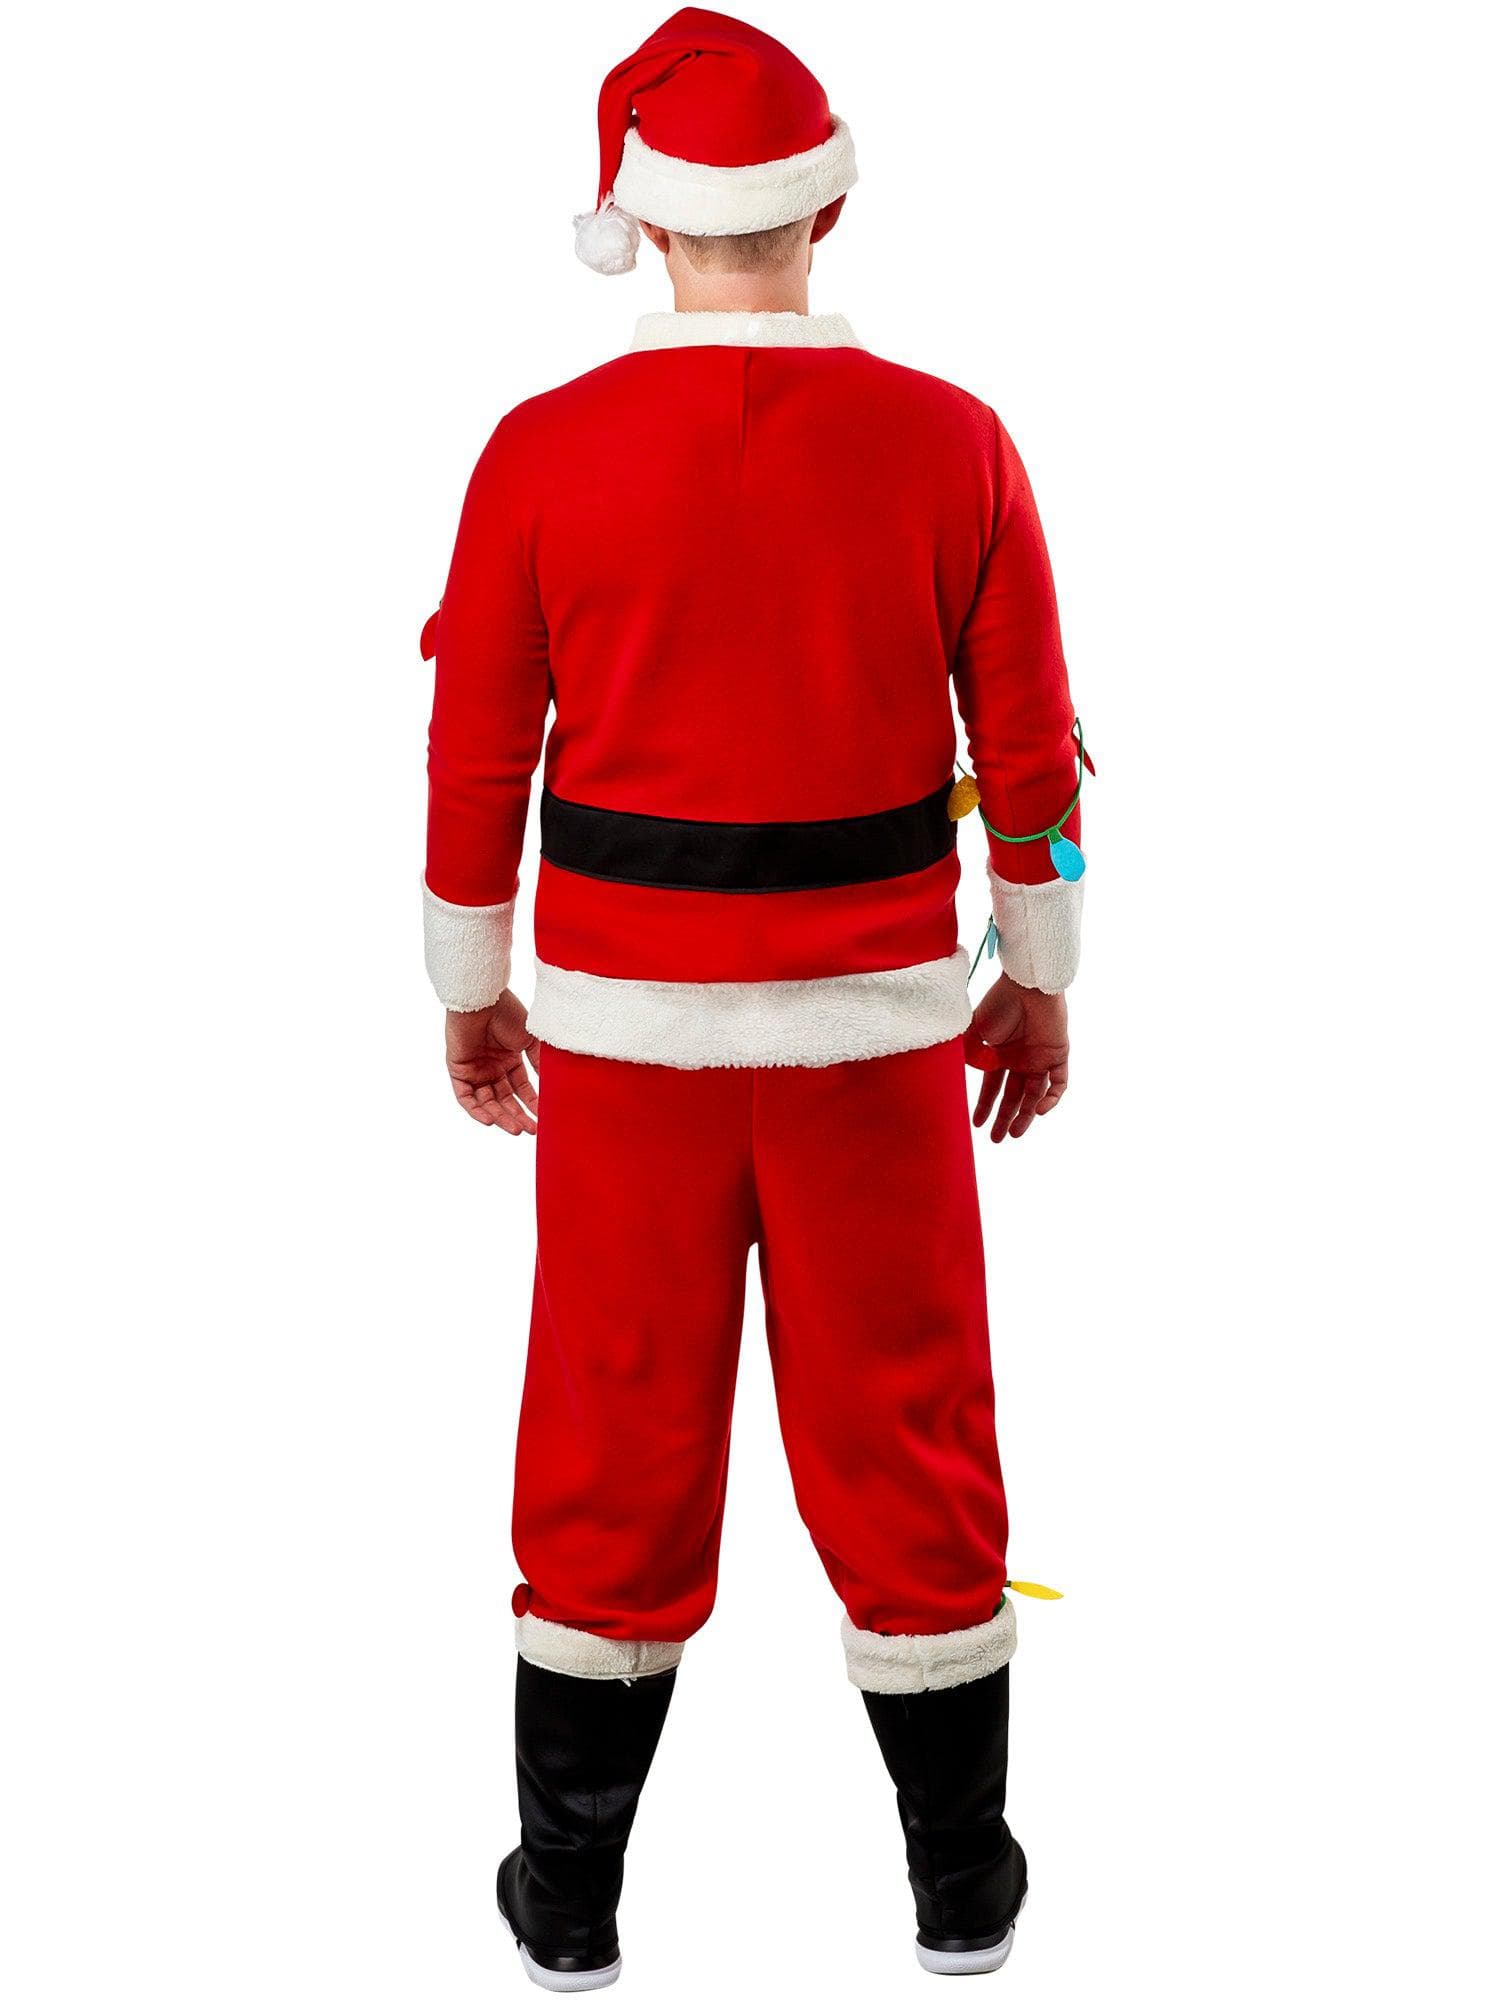 National Lampoon's Christmas Vacation Clark Griswold Adult Costume - costumes.com